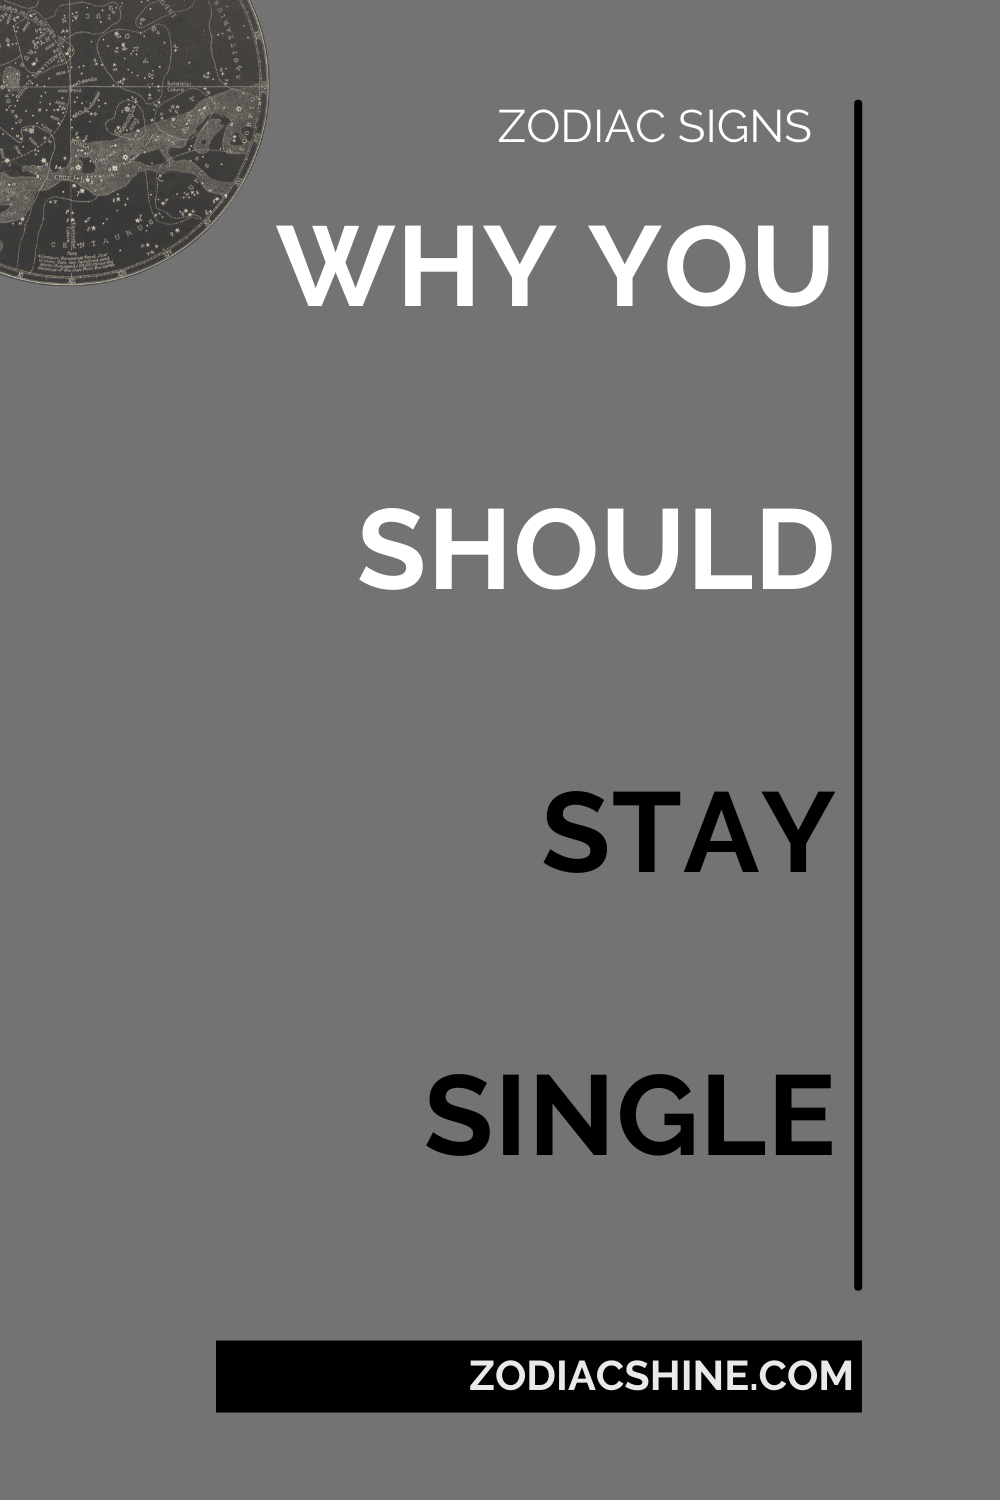 WHY YOU SHOULD STAY SINGLE